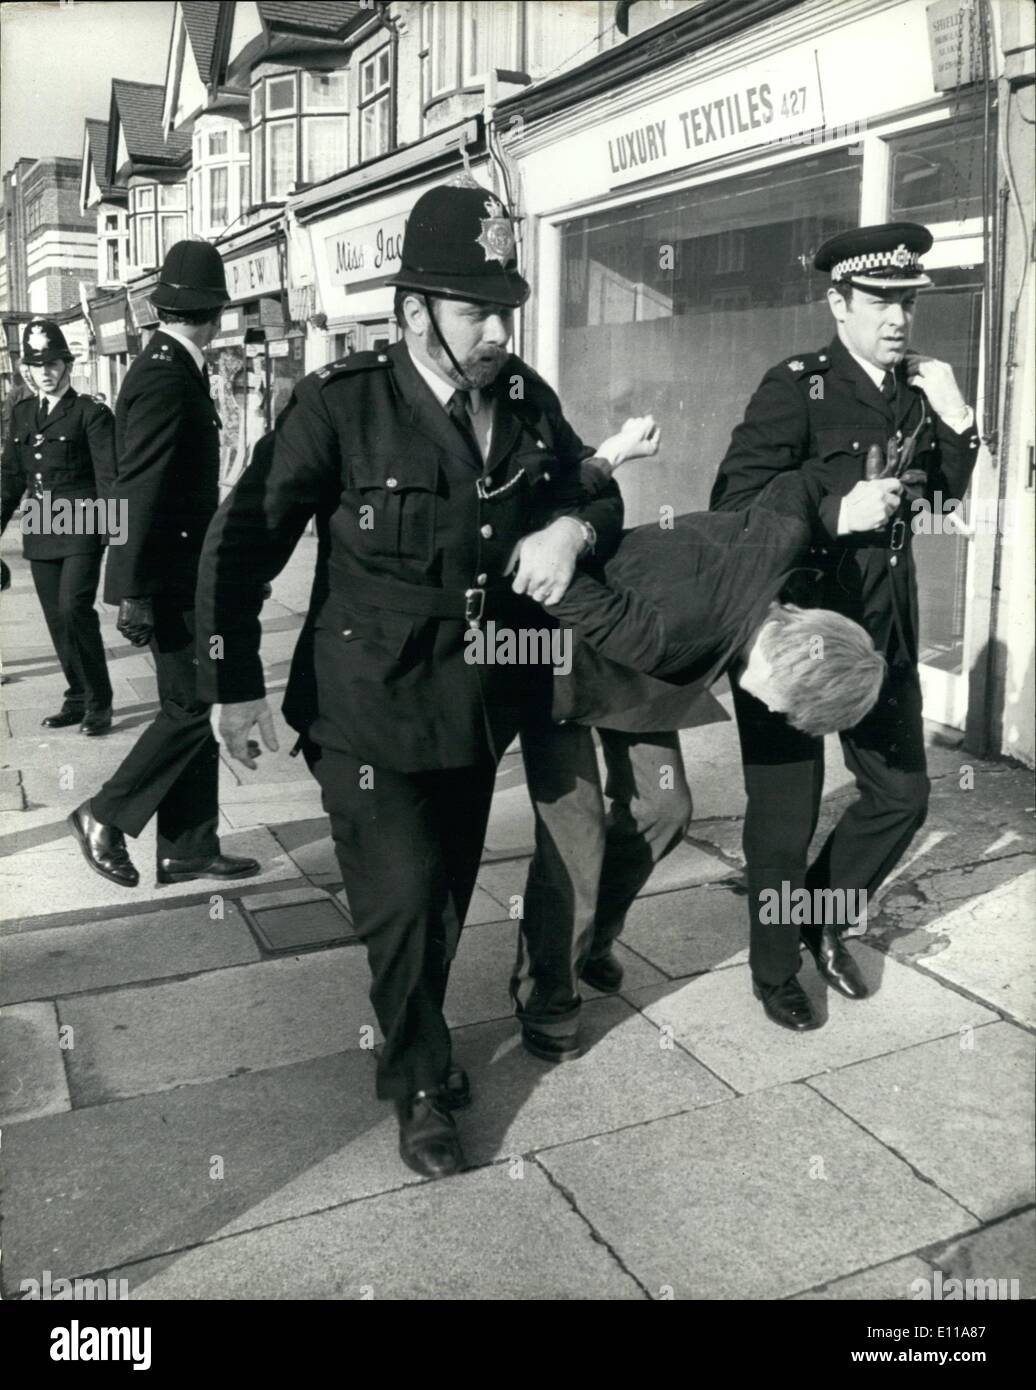 Sep. 27, 1976 - September 27th, 1976 National Front protest against turning a disused warehouse into a Mosque. Two men were arrested during scuffles when 200 National Front demonstrators marched past a disused warehouse in Lea Bridge Road, Leyton, East London yesterday while 3,000 Moslems held a service inside. They were protesting against a plan to turn the building into a Mosque. About 80 International Socialists who staged a counter march were joined by 1,000 Moslems after the service, called the Led festival and marking the end of Ramadan, a period of fasting in the Moslem year Stock Photo